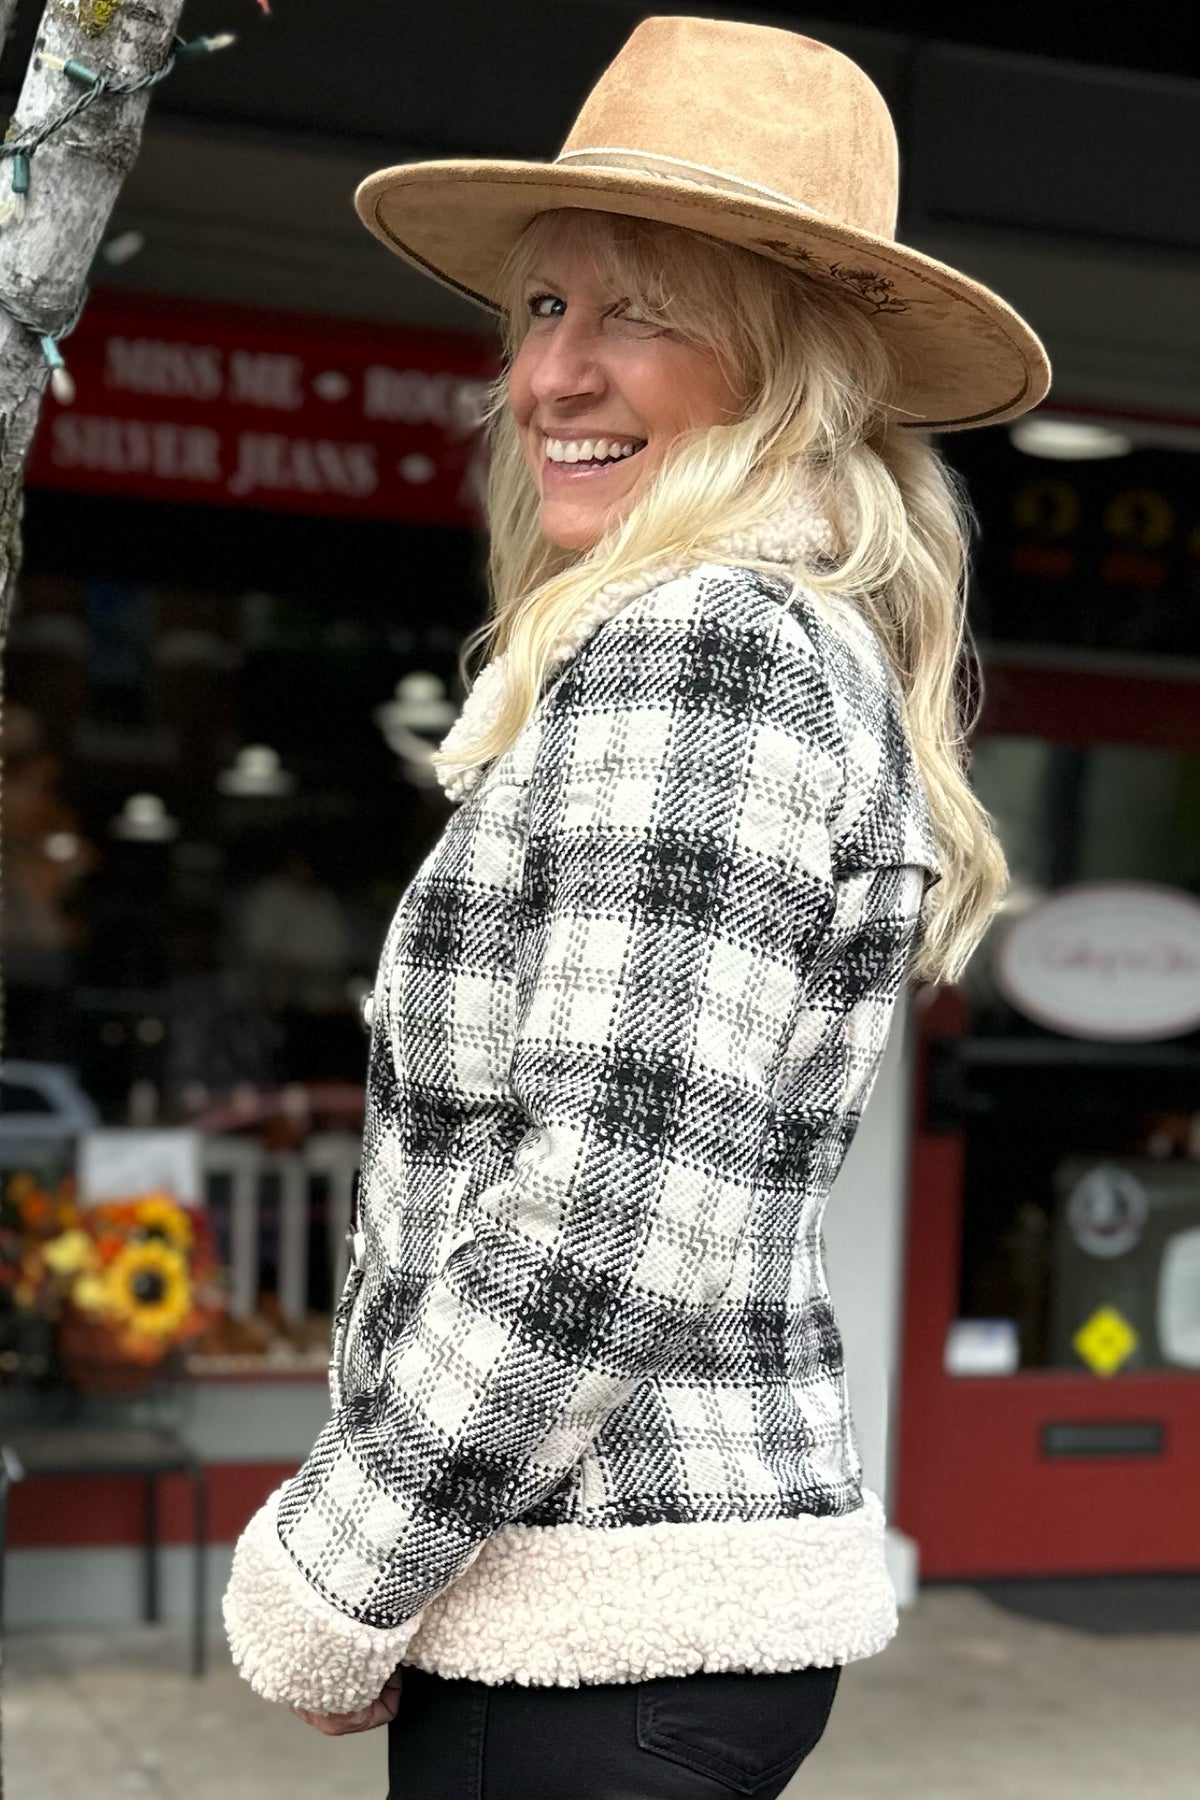 Plaid Wool & Berber Classic Jacket from Powder River Outfitters by Panhandle-Jacket-Panhandle Slim-Gallop 'n Glitz- Women's Western Wear Boutique, Located in Grants Pass, Oregon